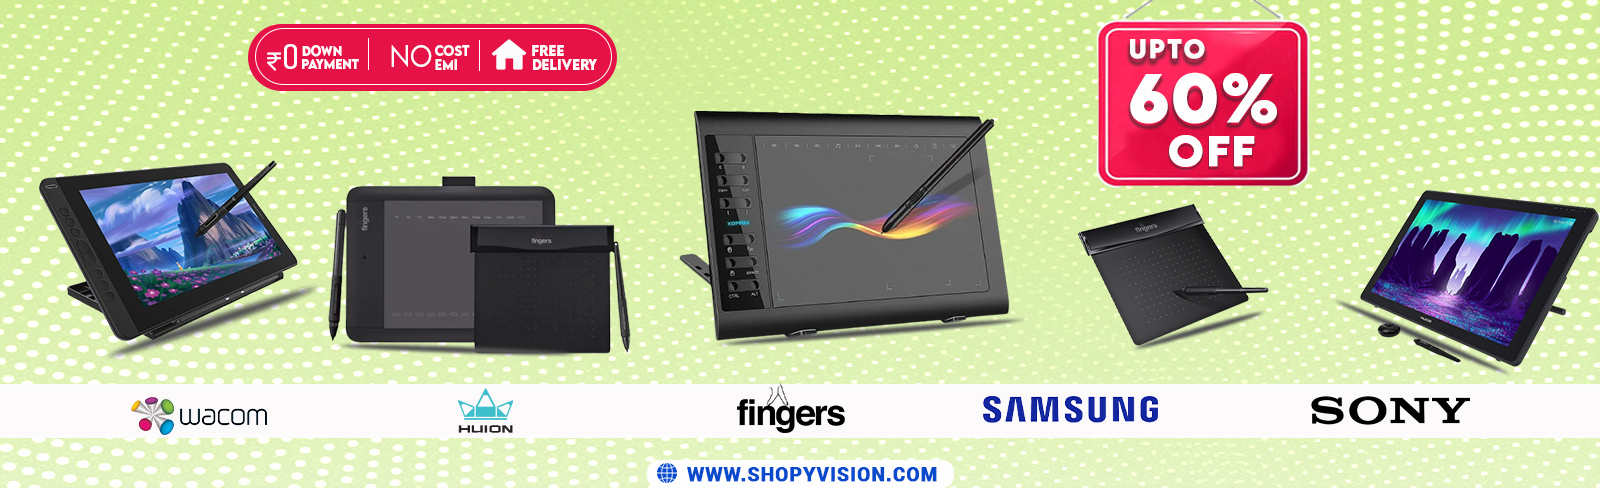 Graphic Tablet Banner